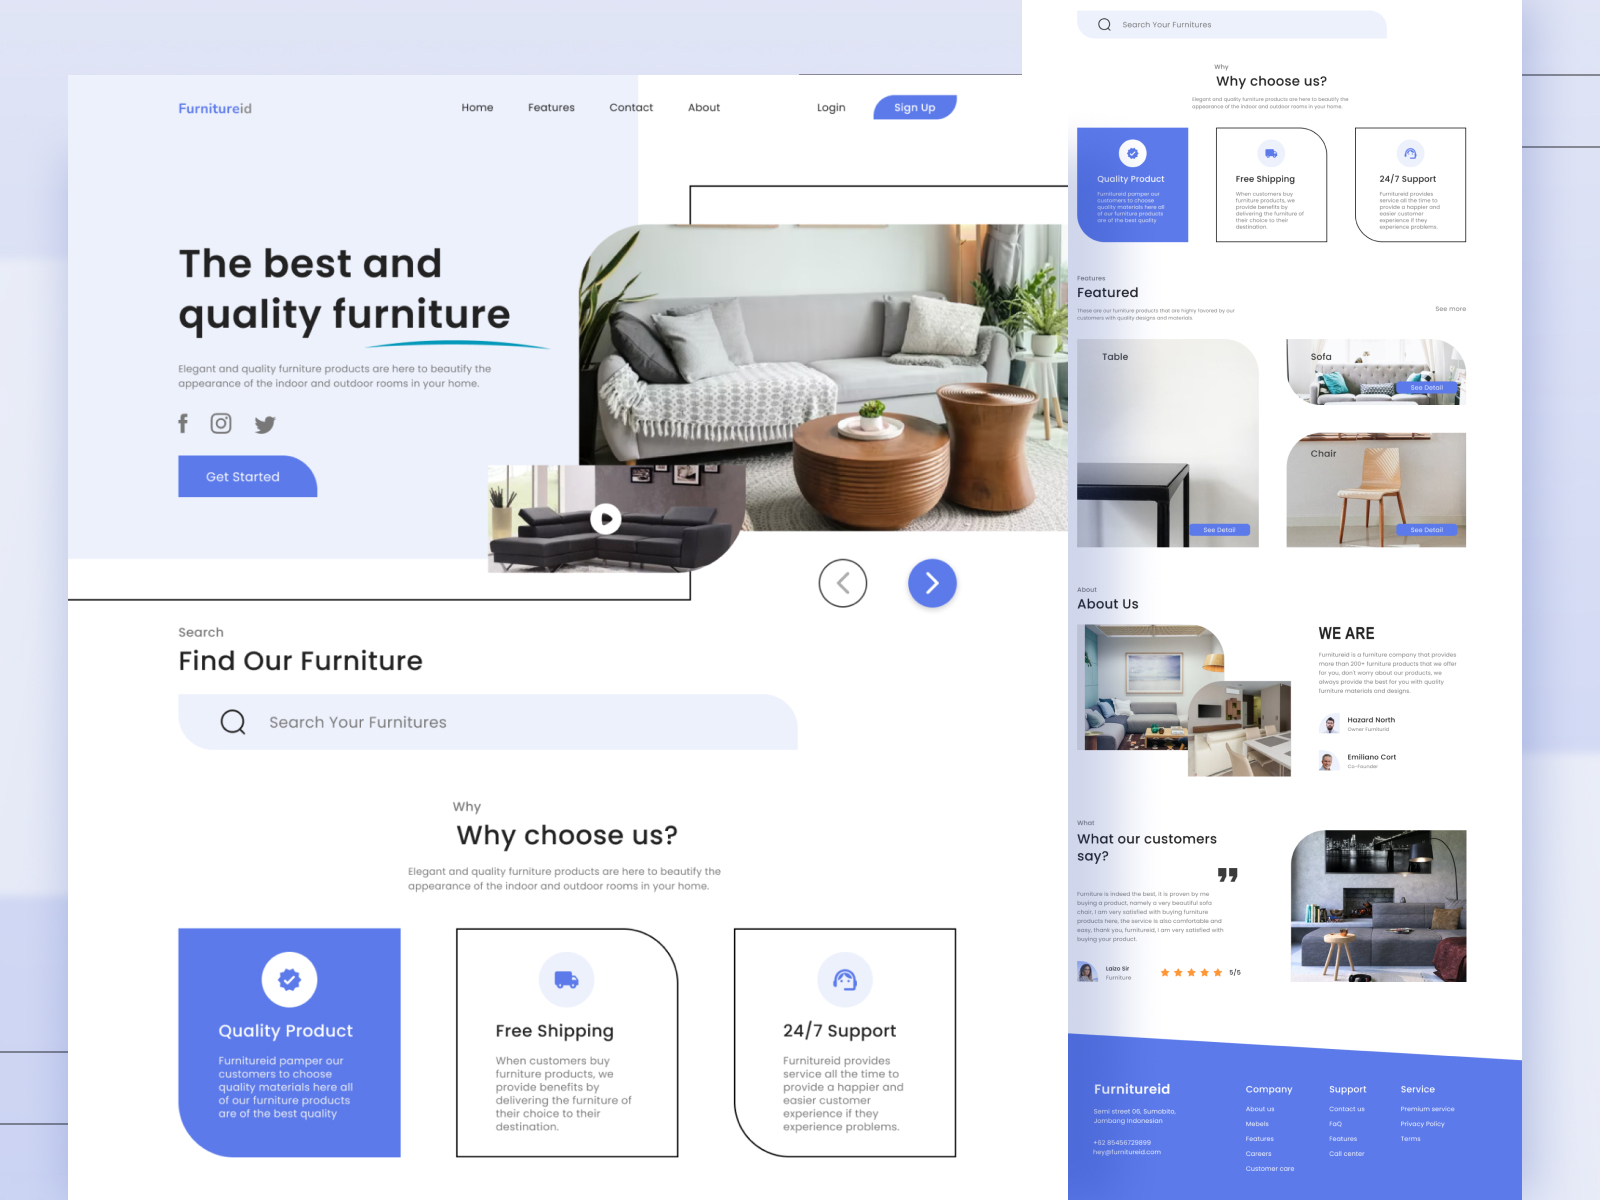 Furniture - Web Design by Fitra Purwaka on Dribbble